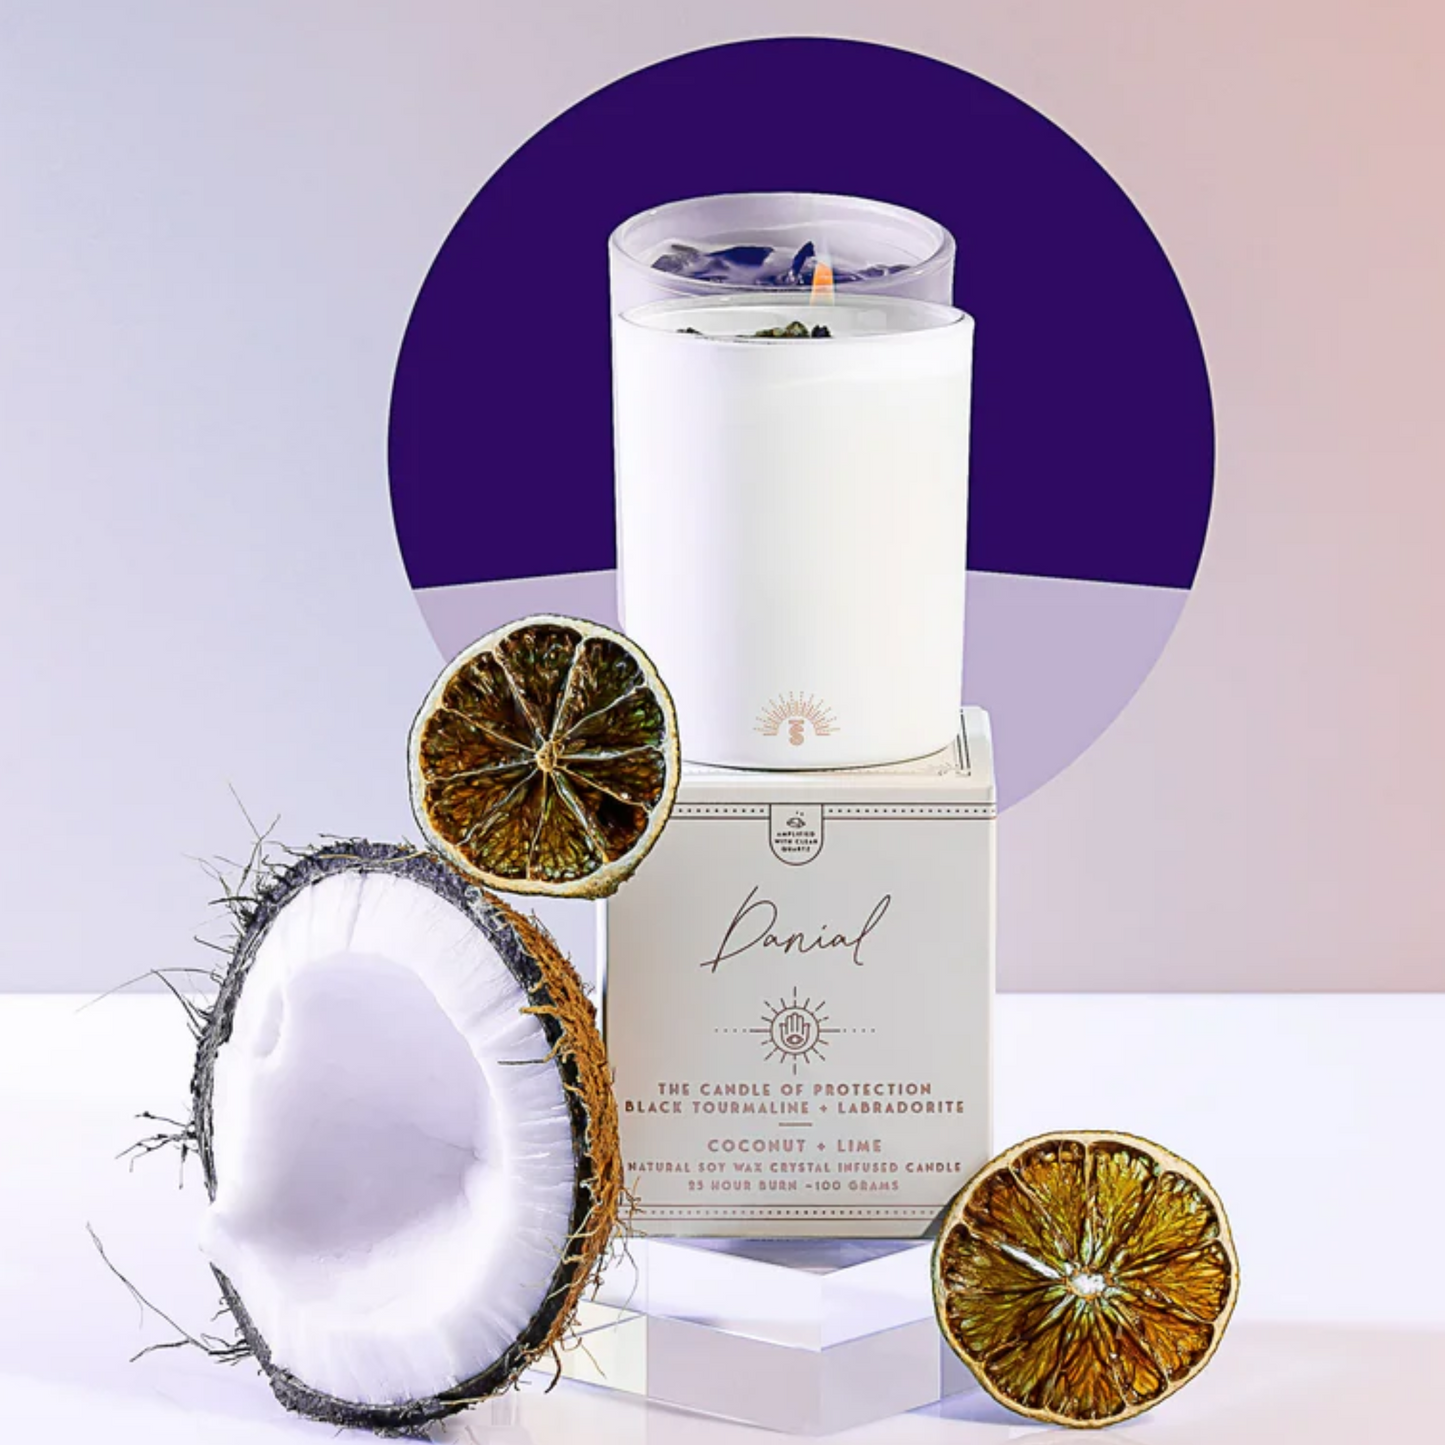 Danial | Crystal Infused Candle of Protection | Coconut & Lime